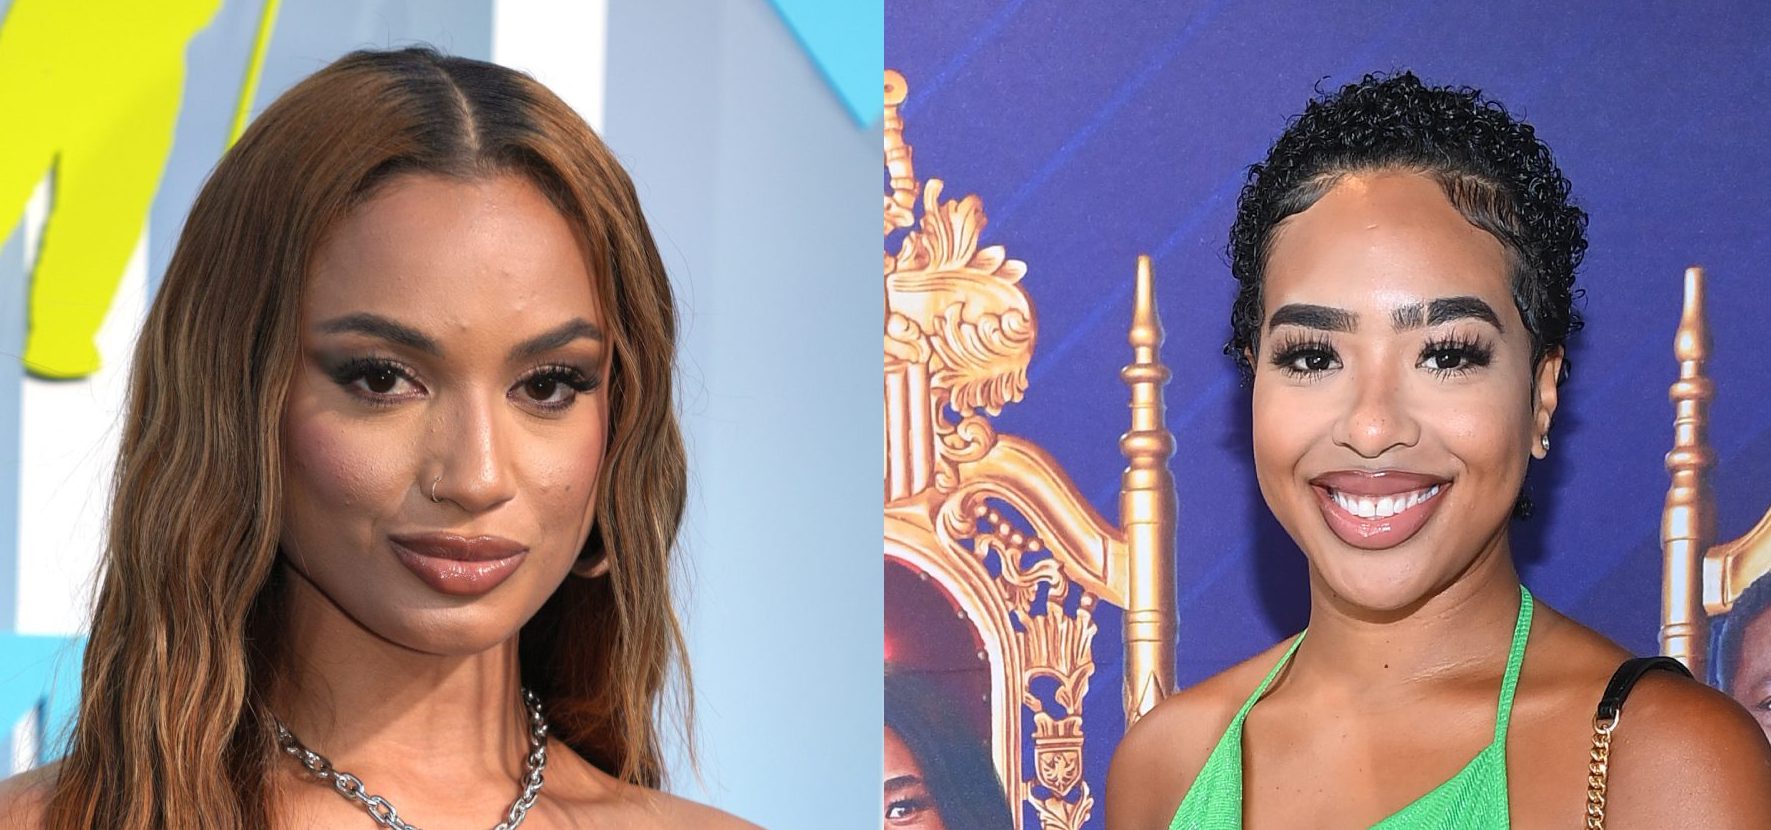 DaniLeigh Speaks Out About Situation With B. Simone–Says She “Didn’t Think It Was That Deep”